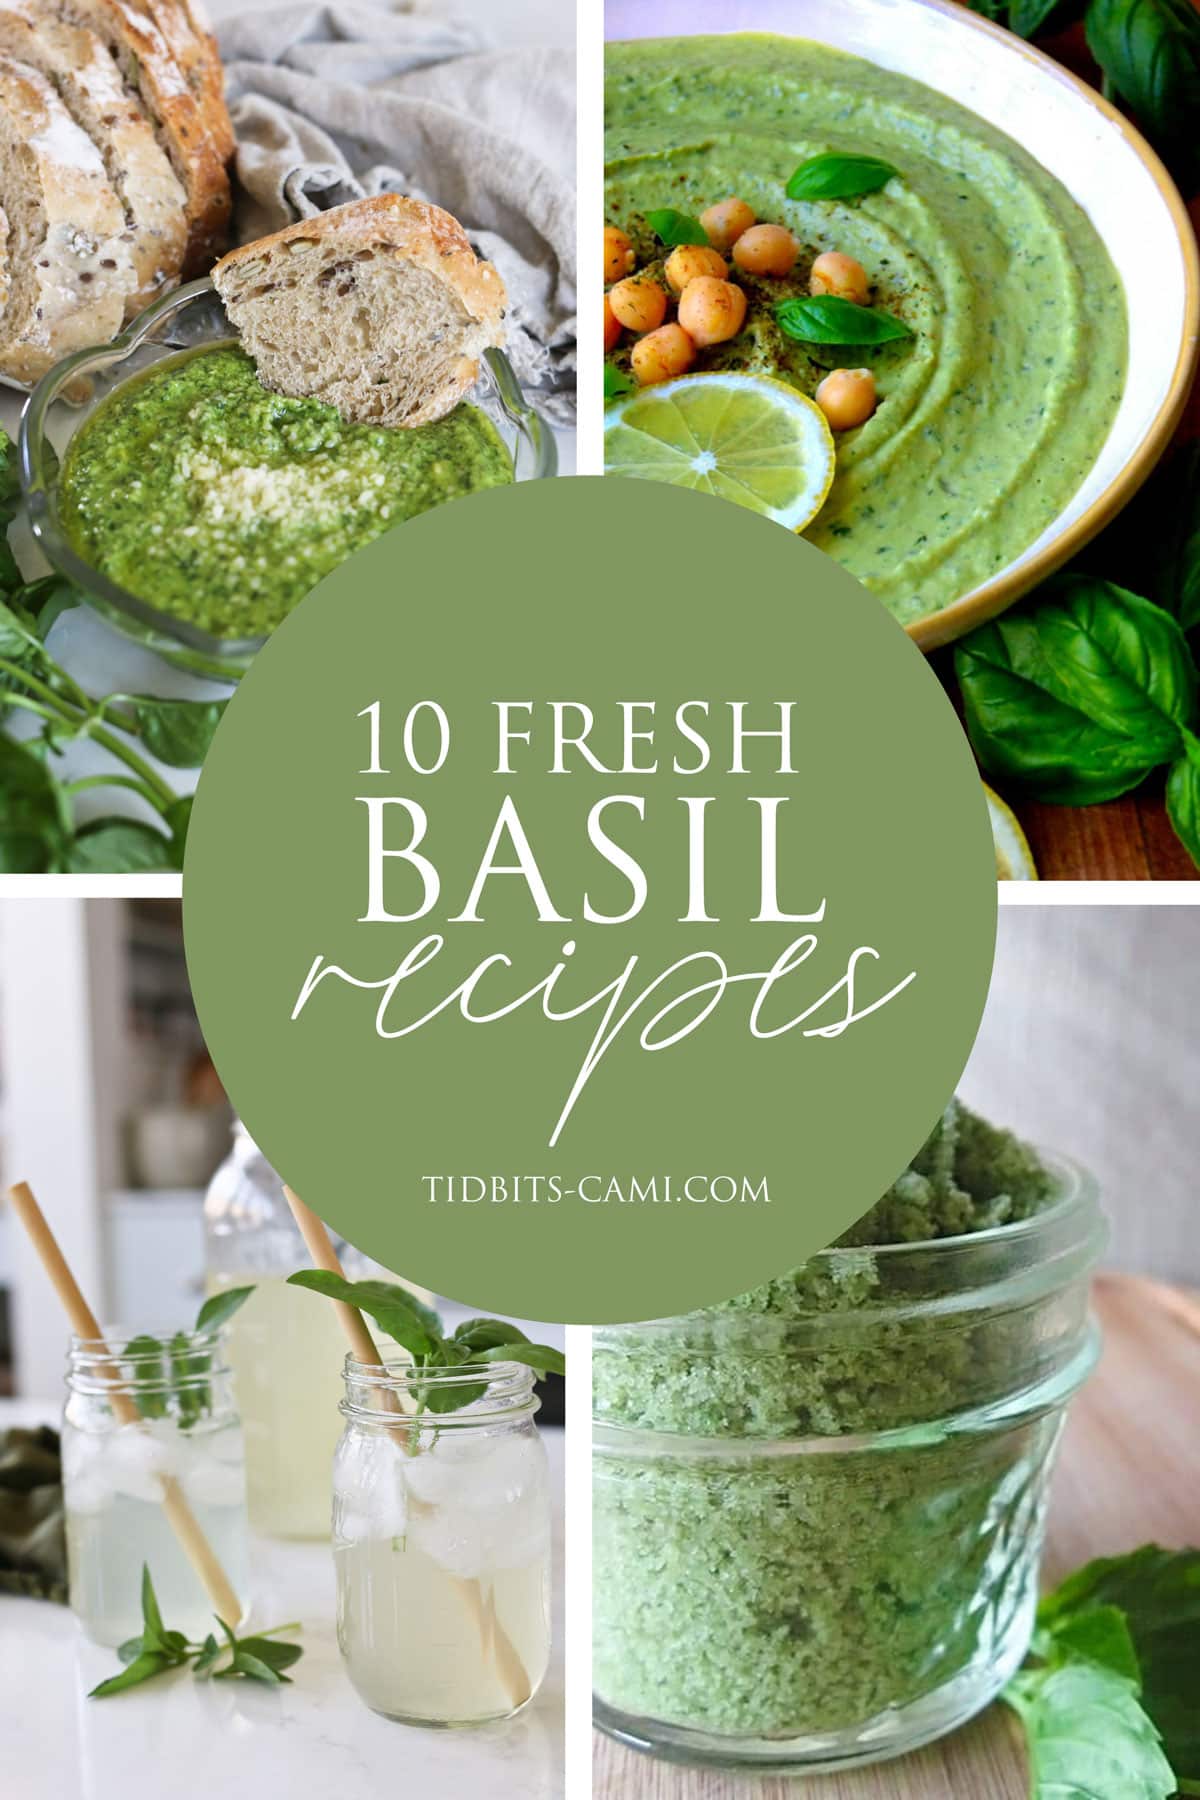 If your garden is abundant with basil, let's explore what to make with fresh basil with these 10 yummy fresh basil recipes.